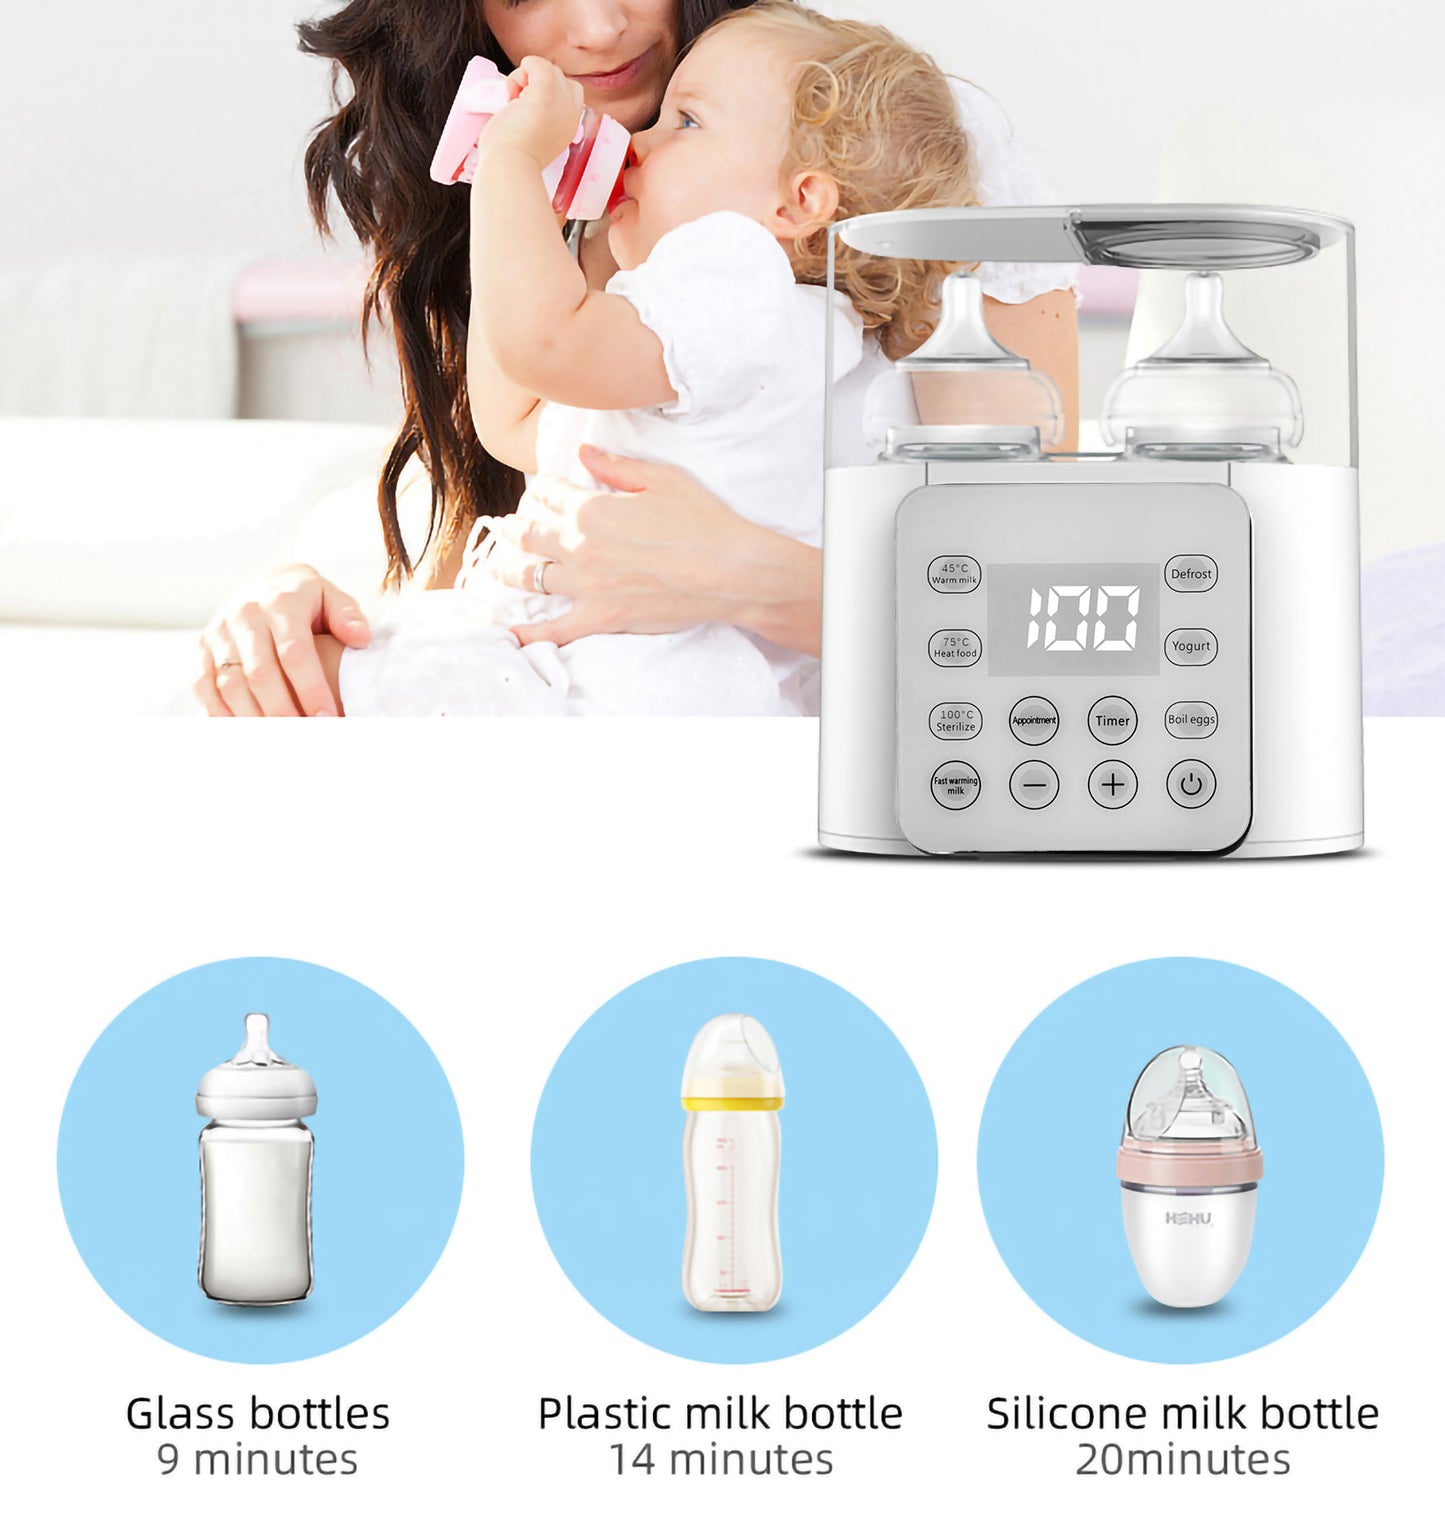 Baby Bottle Warmer 6 in 1 Multifunction Breast Milk Warmer, Fast Baby Food Heater & Defrost Warmer with Timer for Twins, LCD Display Accurate Temperature Adjustment, 24H Constant Mode